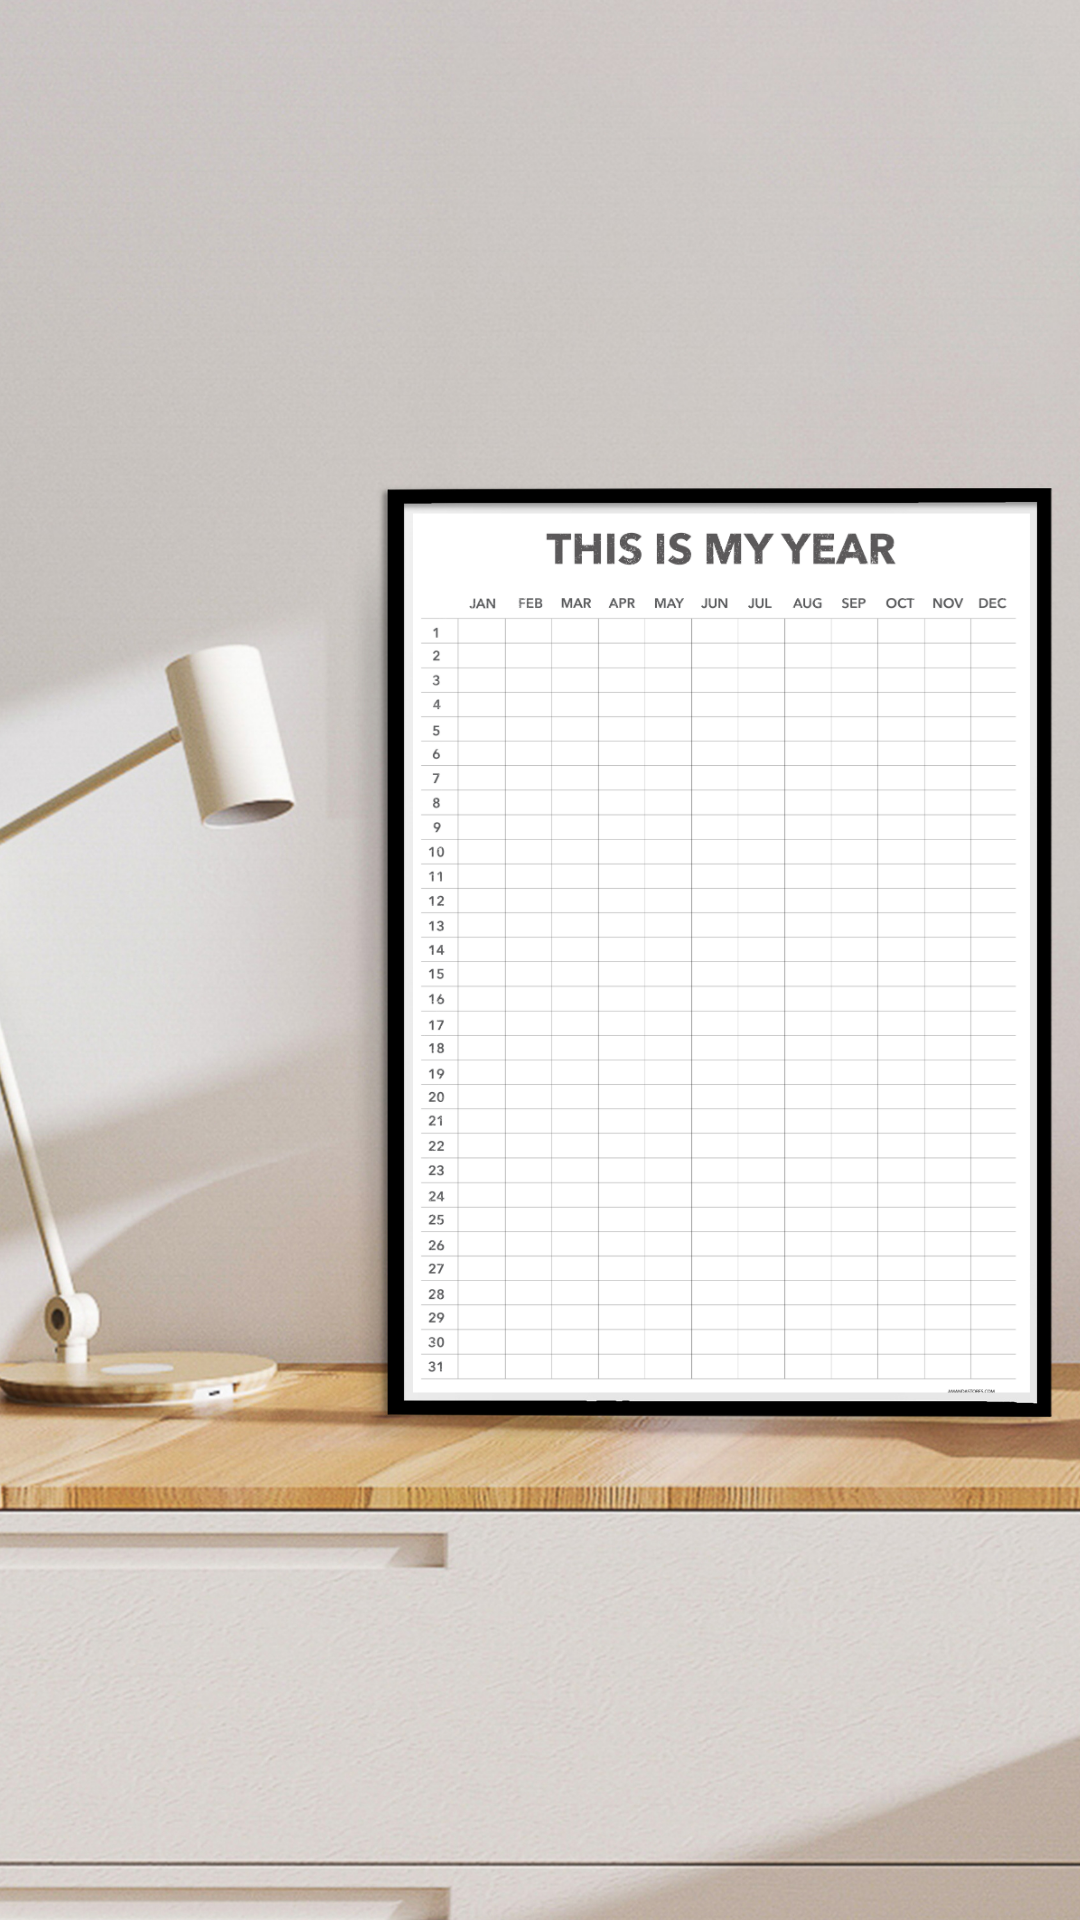 This is My Year - Reusable Forever Wall Calendar - 18" x 24"- PHYSICAL COPY